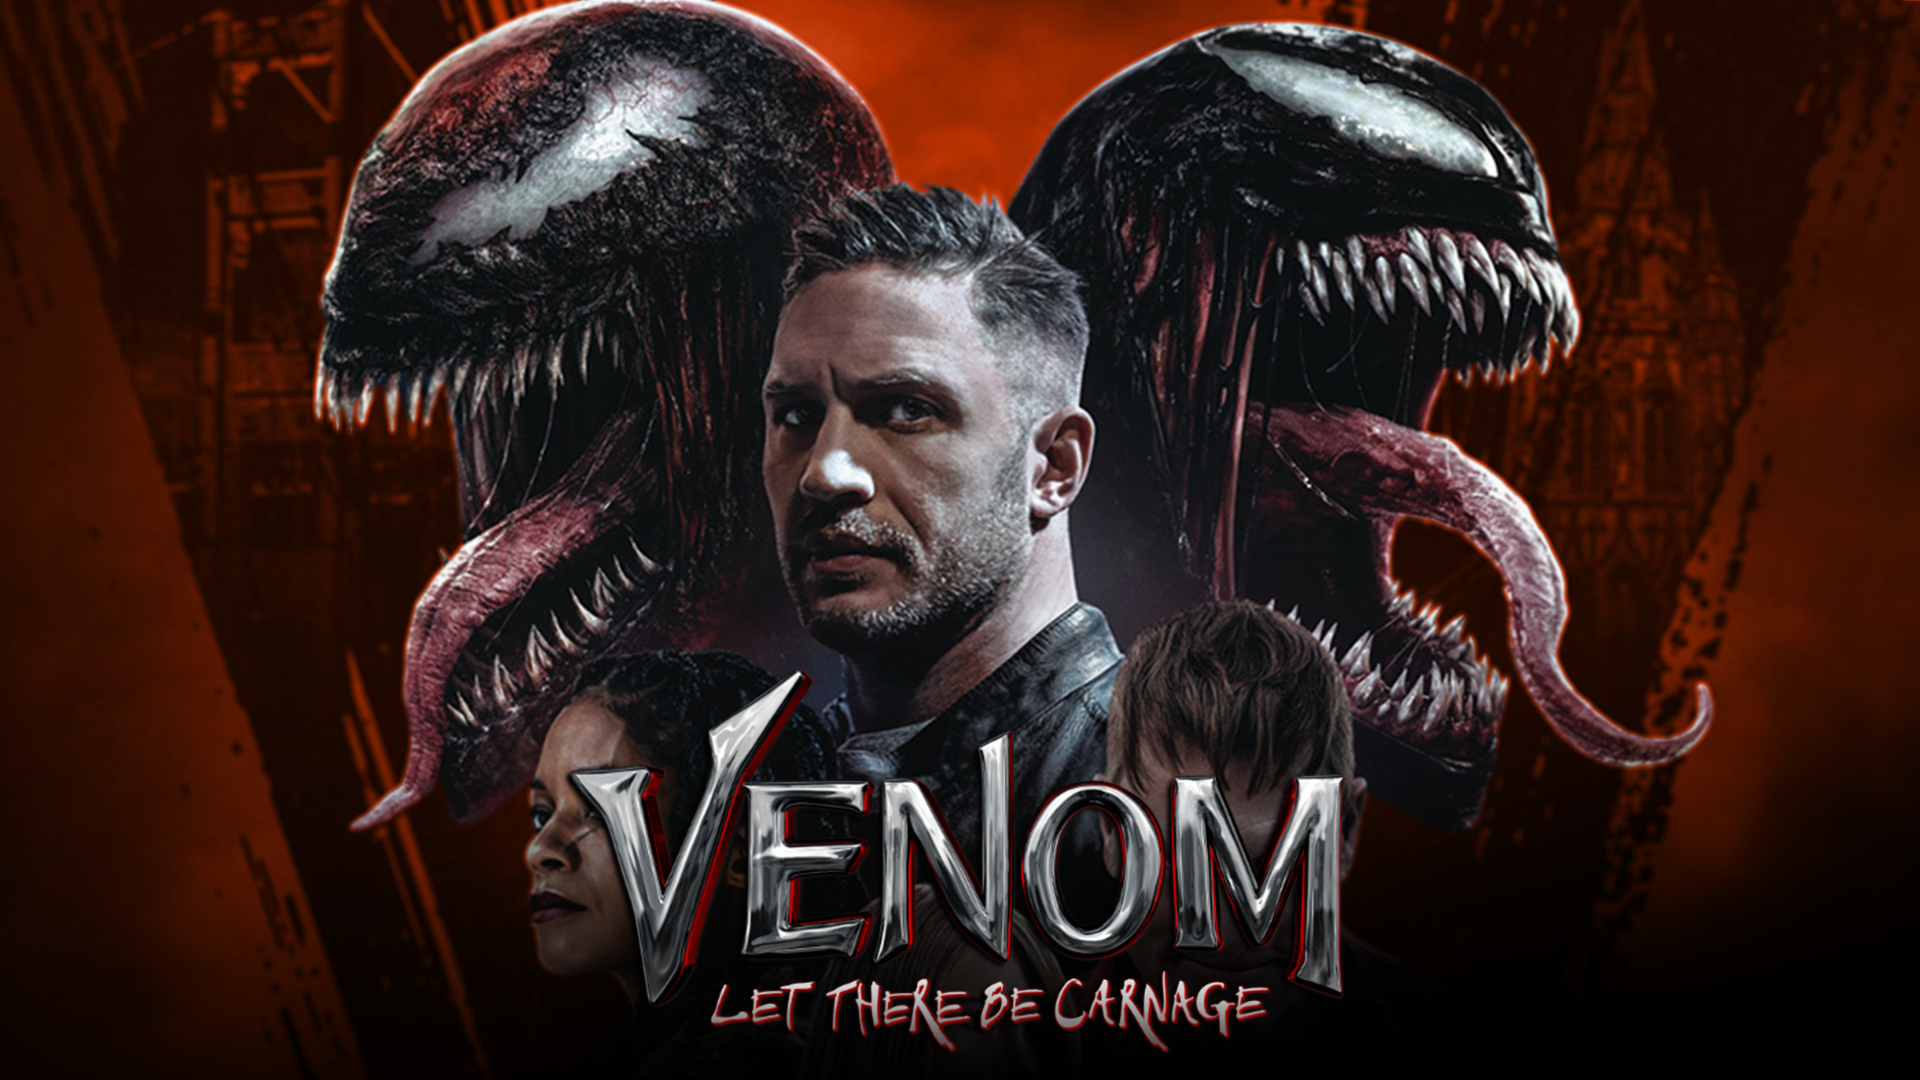 Tom Hardy, Woody Harrelson, Naomi Harris, and director Andy Serkis knew exactly what type of movie Venom should be and went for it!